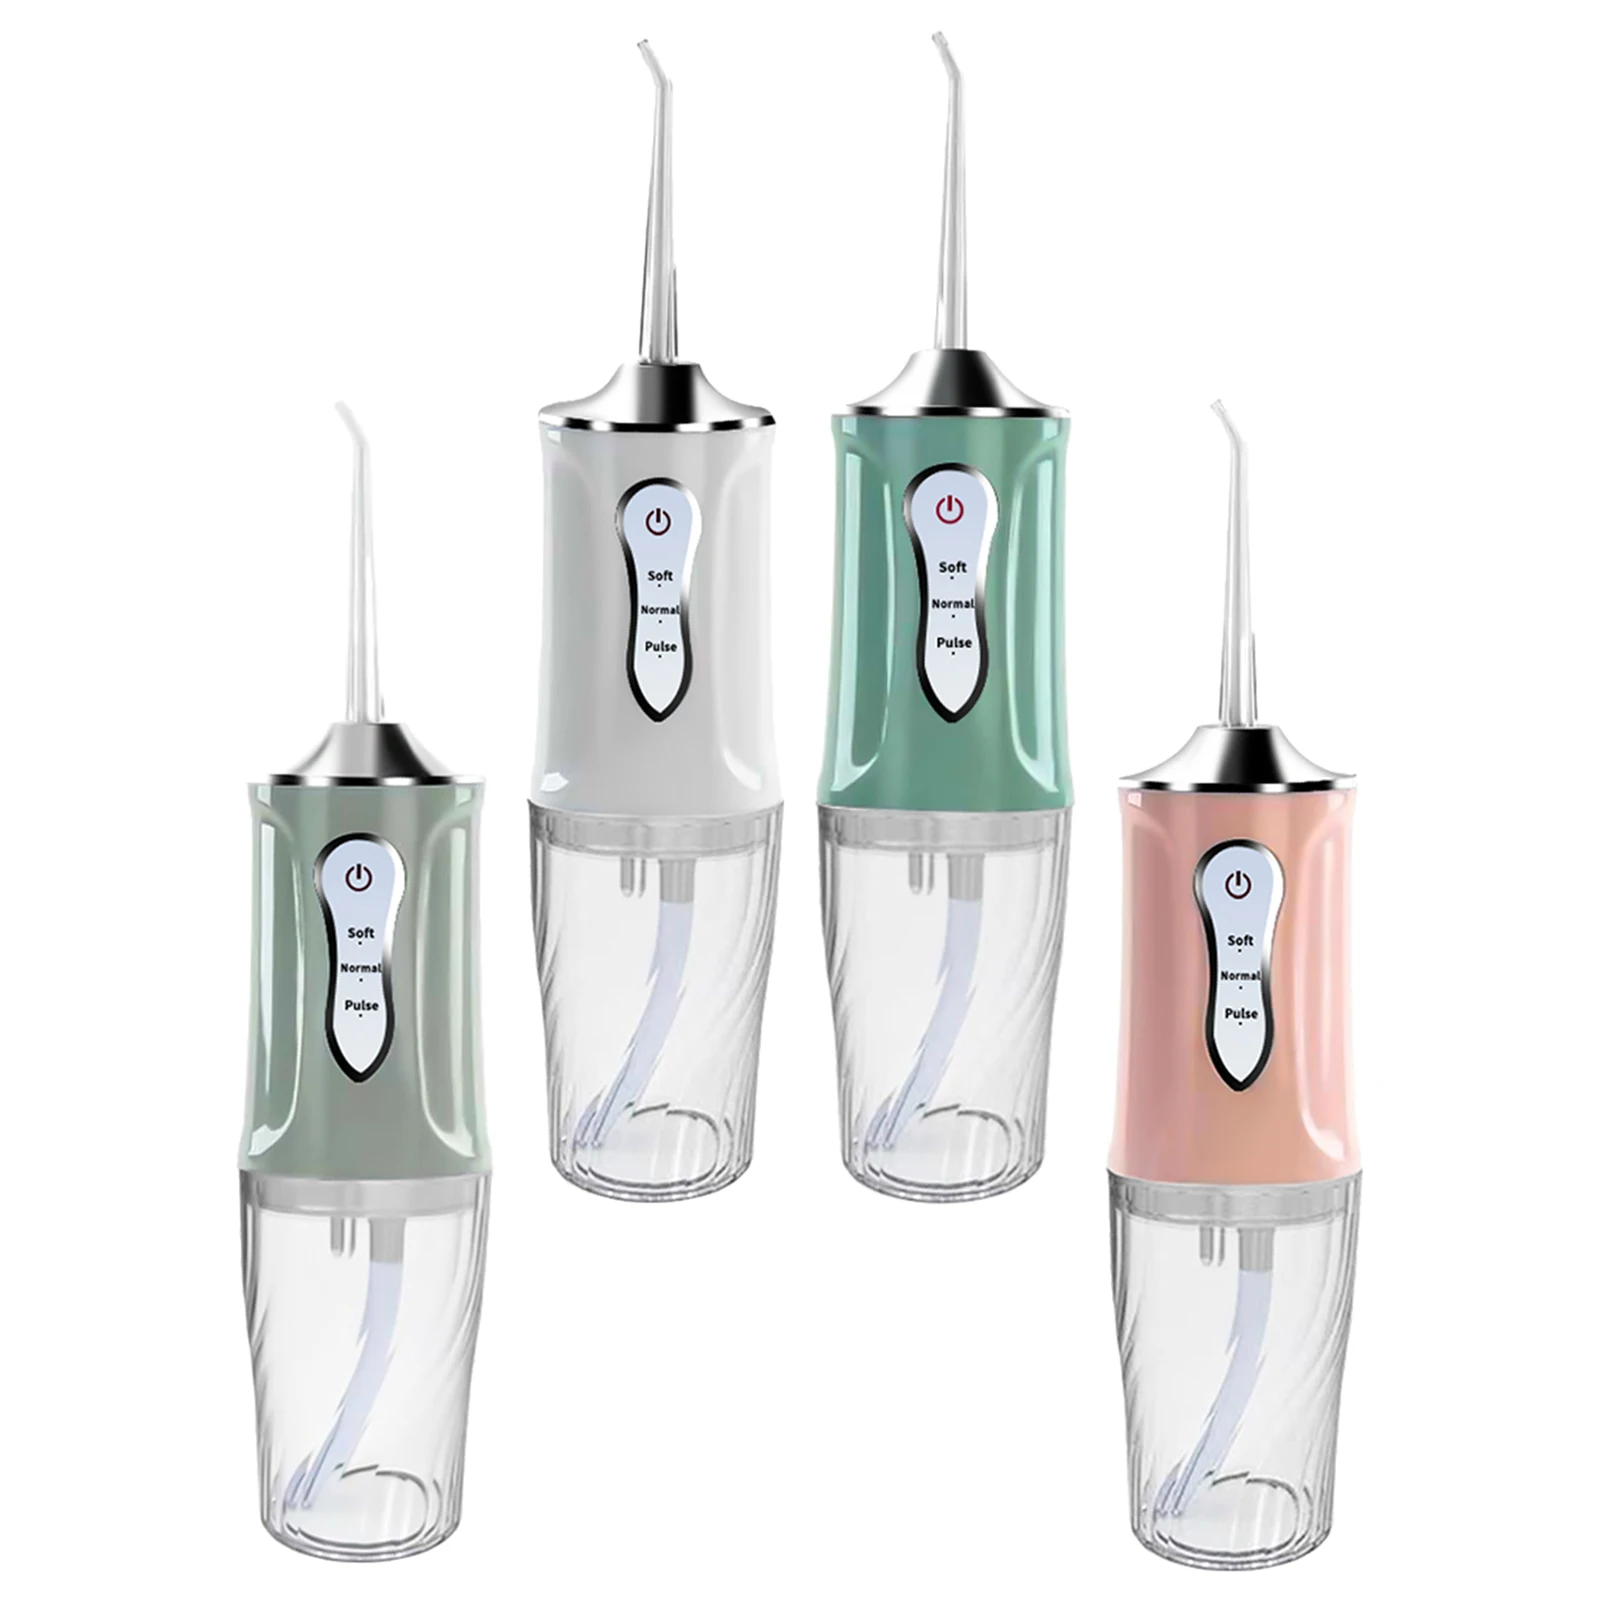 Oral Irrigator USB 3 Modes Cleanable Battery Operated Jet Cordless Advanced Portable Powerful Cleaner Nozzles for Braces